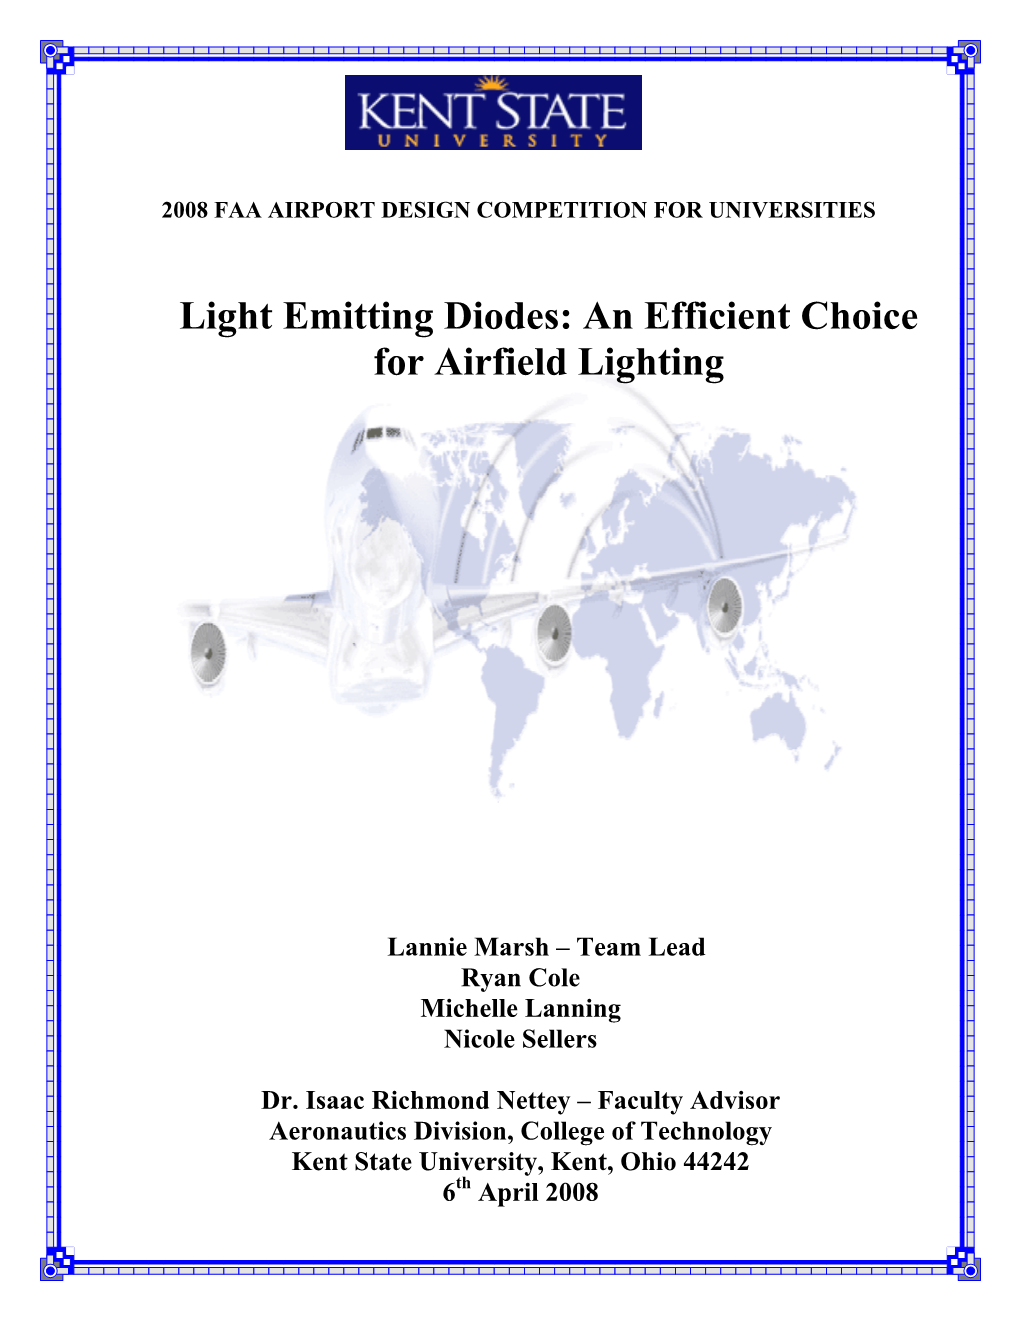 Light Emitting Diodes: an Efficient Choice for Airfield Lighting